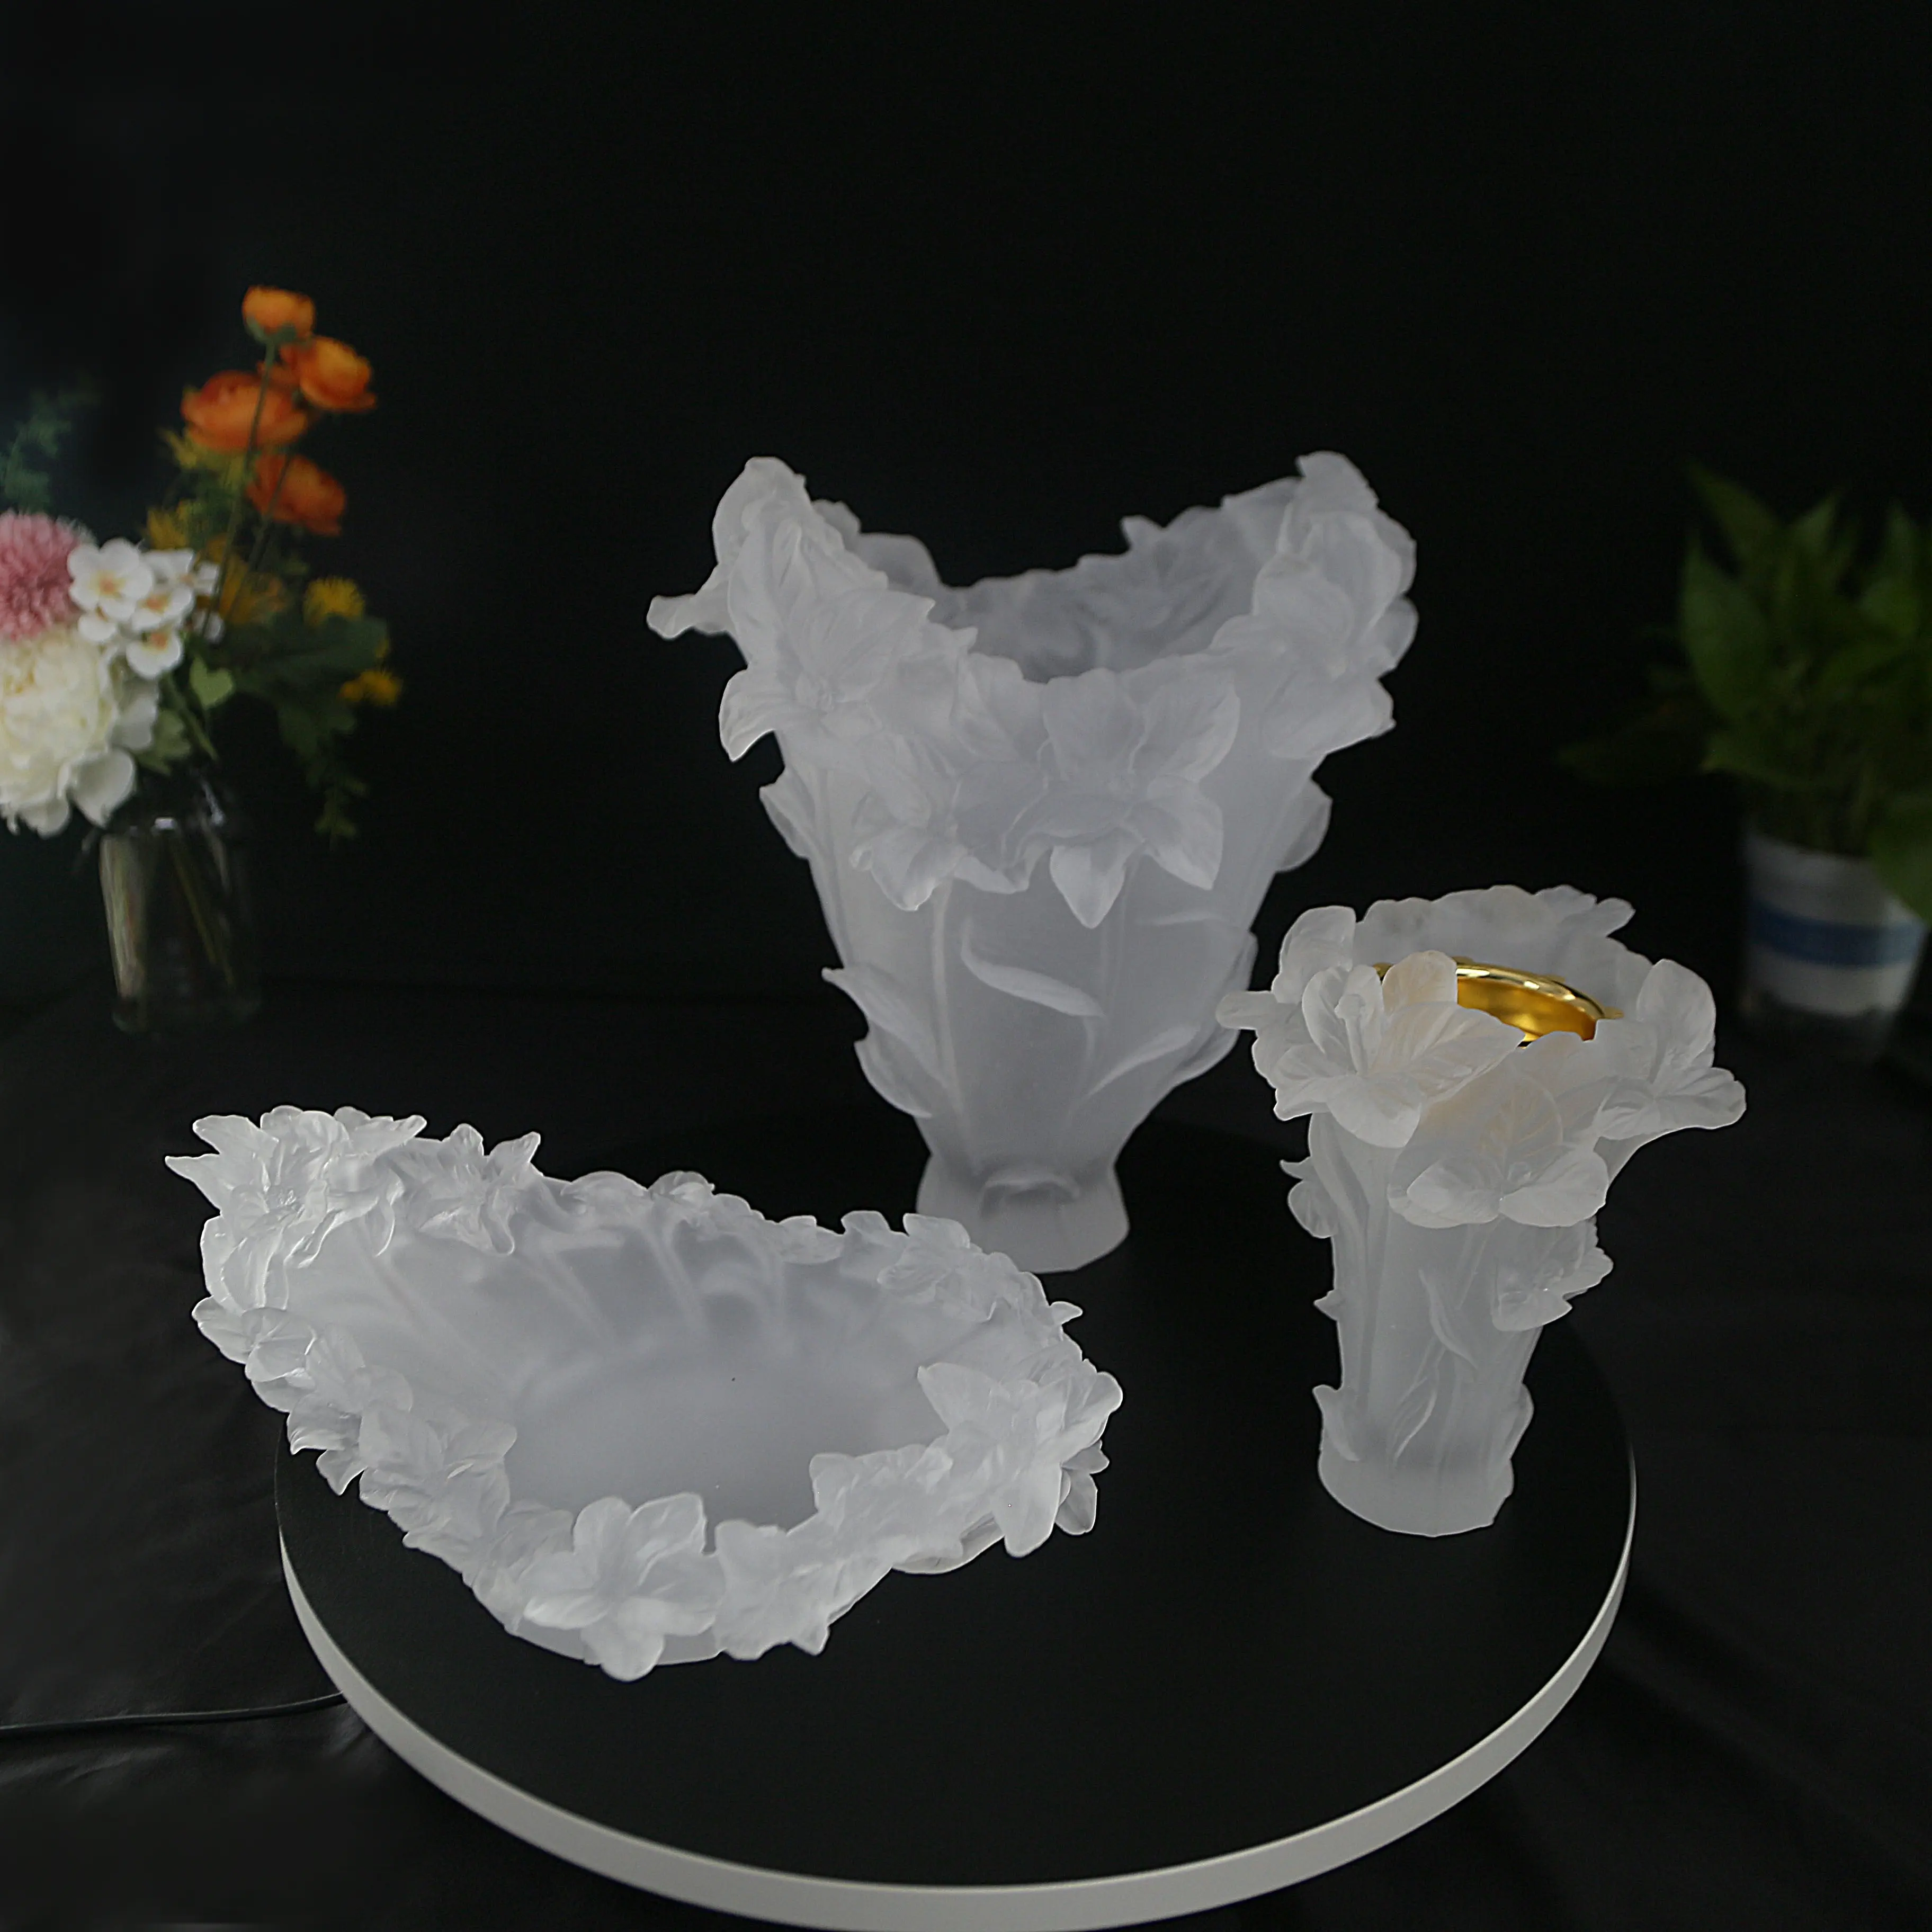 Latest Luxury Style Orchid Flower Vase Fruit Bowl Crystal Decorative Set For Home Wedding Hotel Office Ornament